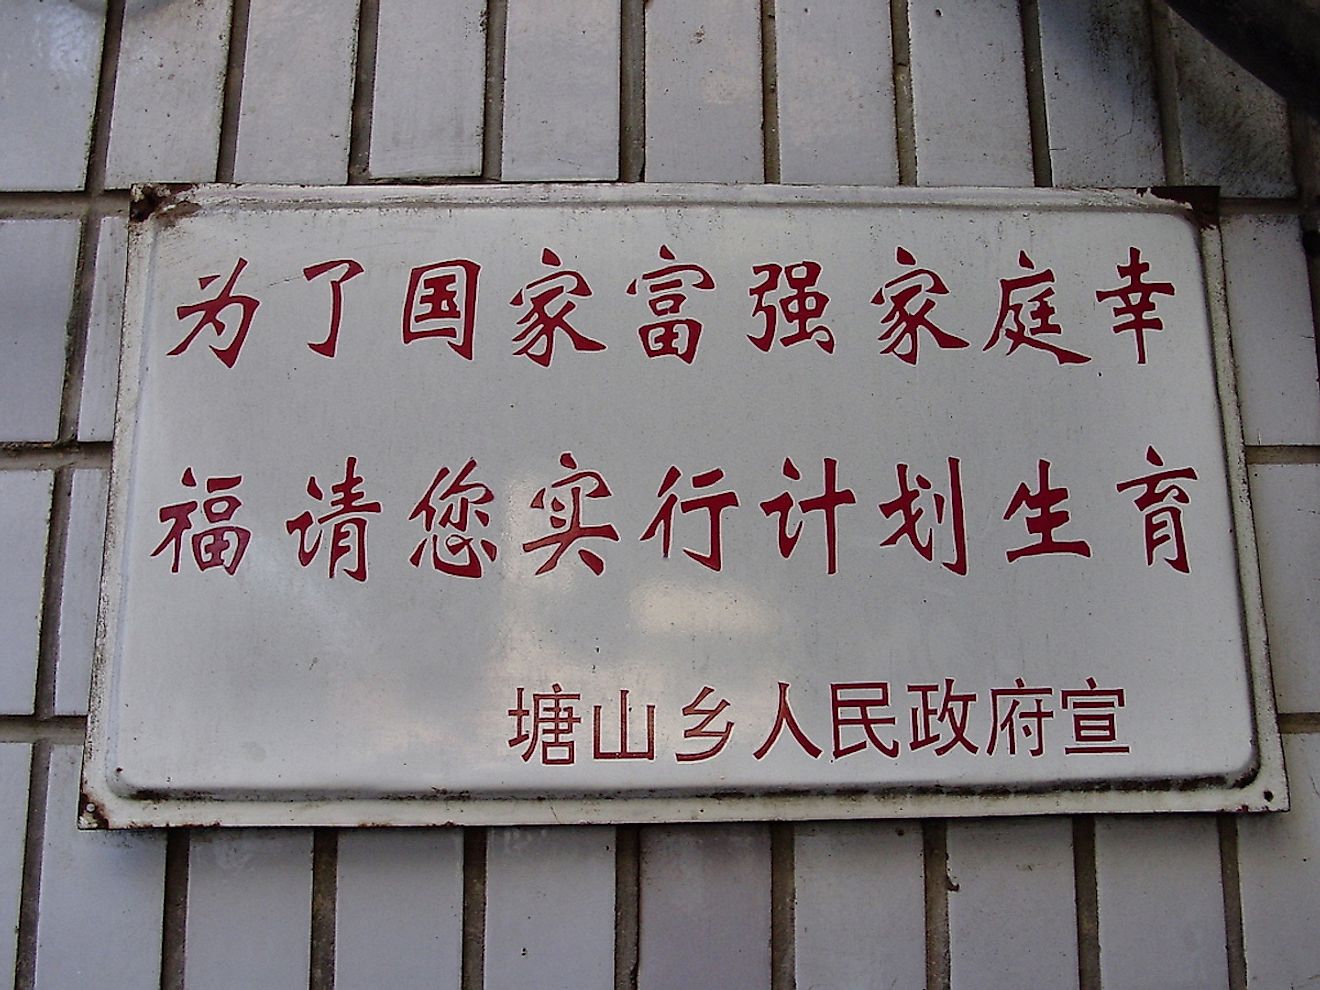 "Please for the sake of your country, use birth control. Sign put up by the Chinese government to discourage couples having more than one child. Image credit: Venus/Wikimedia.org